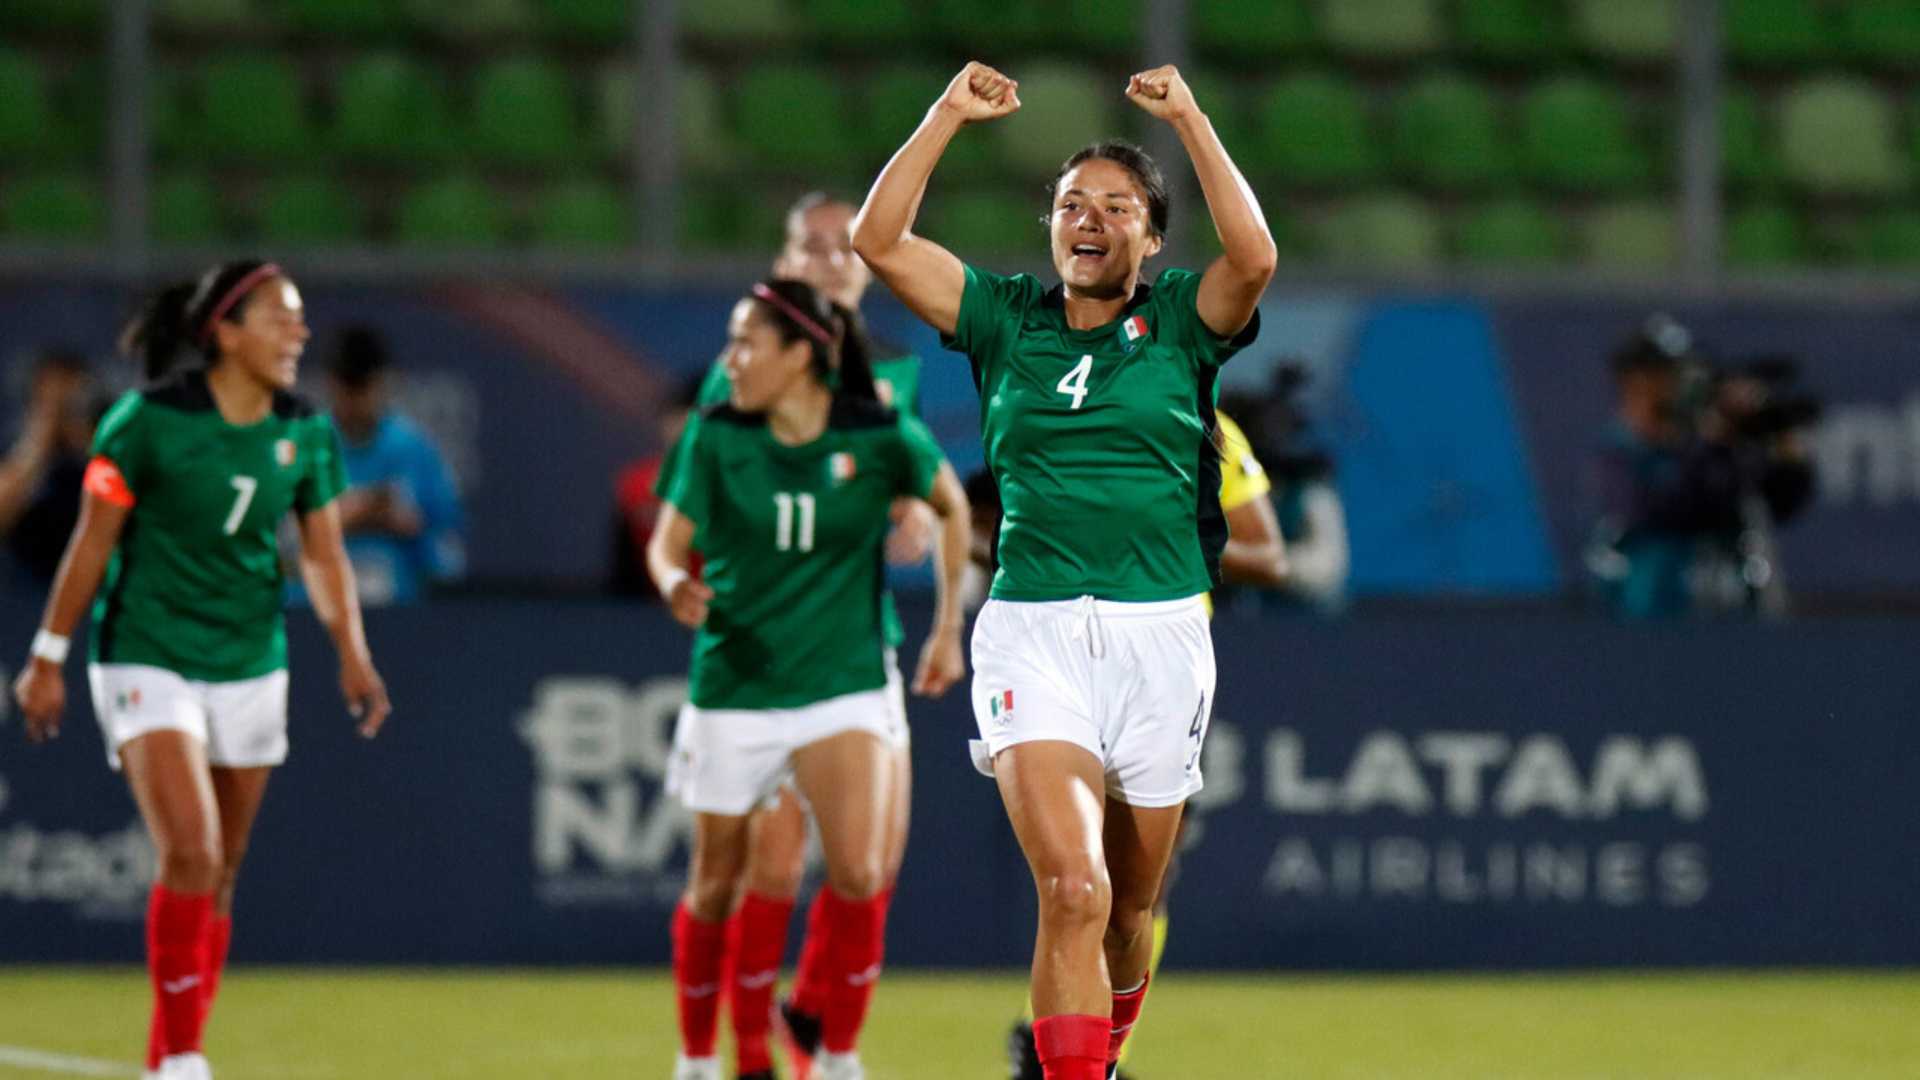 Mexico won gold in female's football by defeating Chile